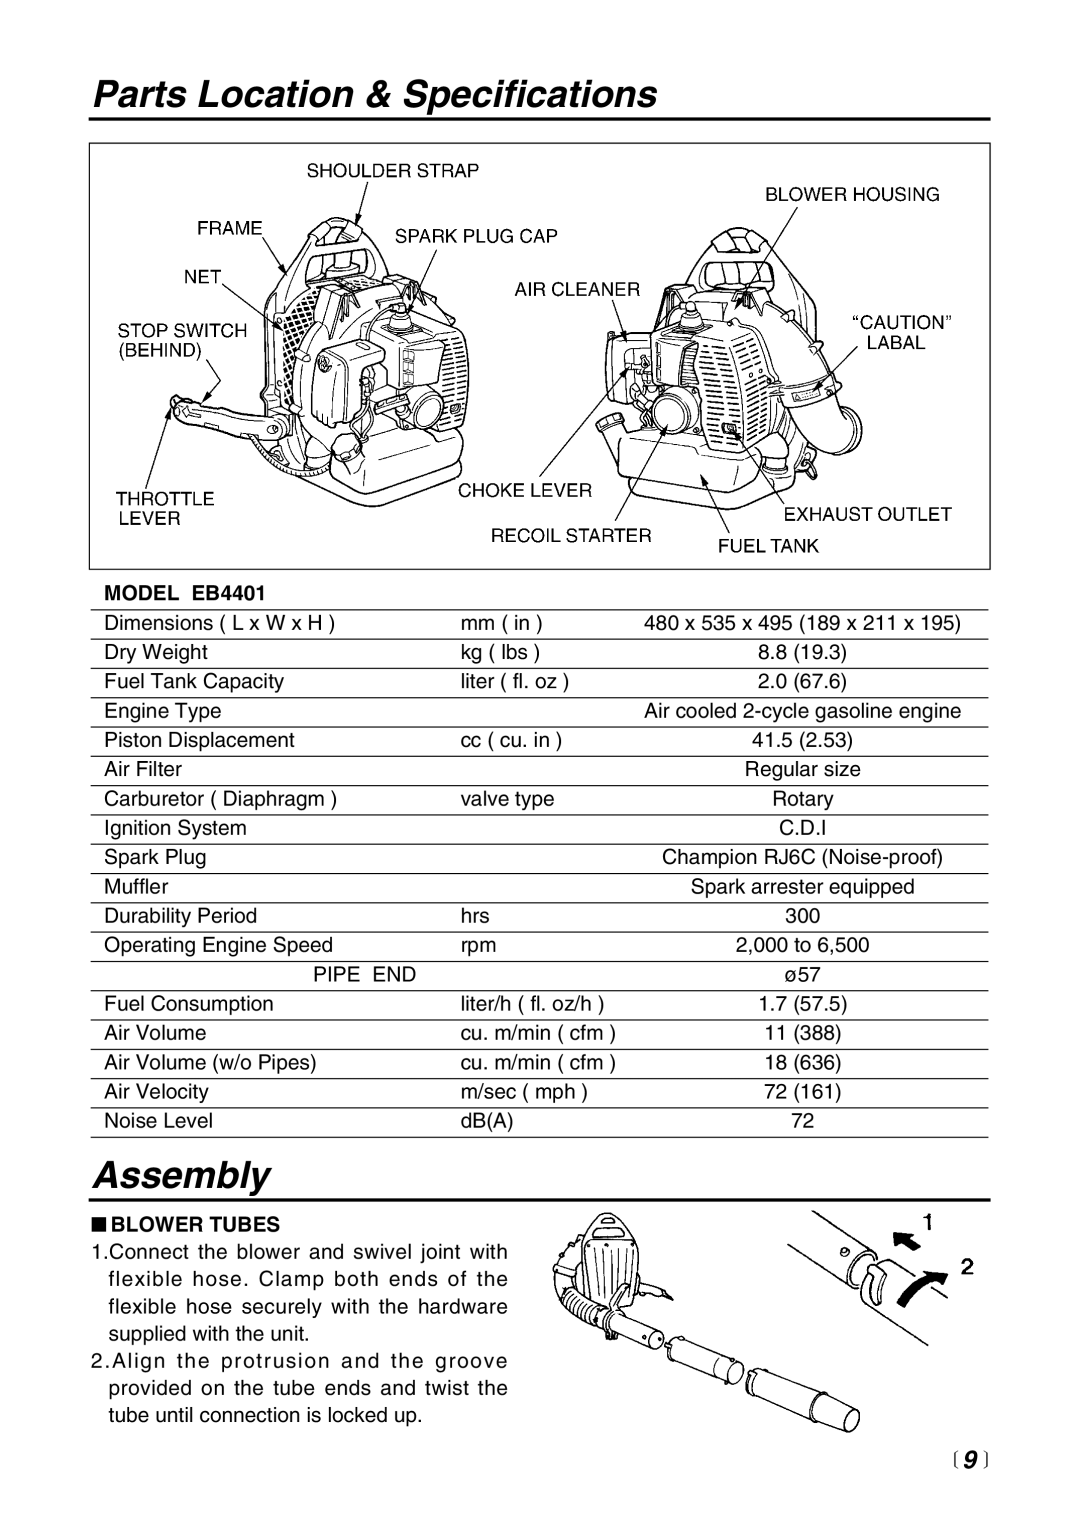 RedMax manual Parts Location & Specifications, Assembly, 9 , MODEL EB4401, Blower Tubes 